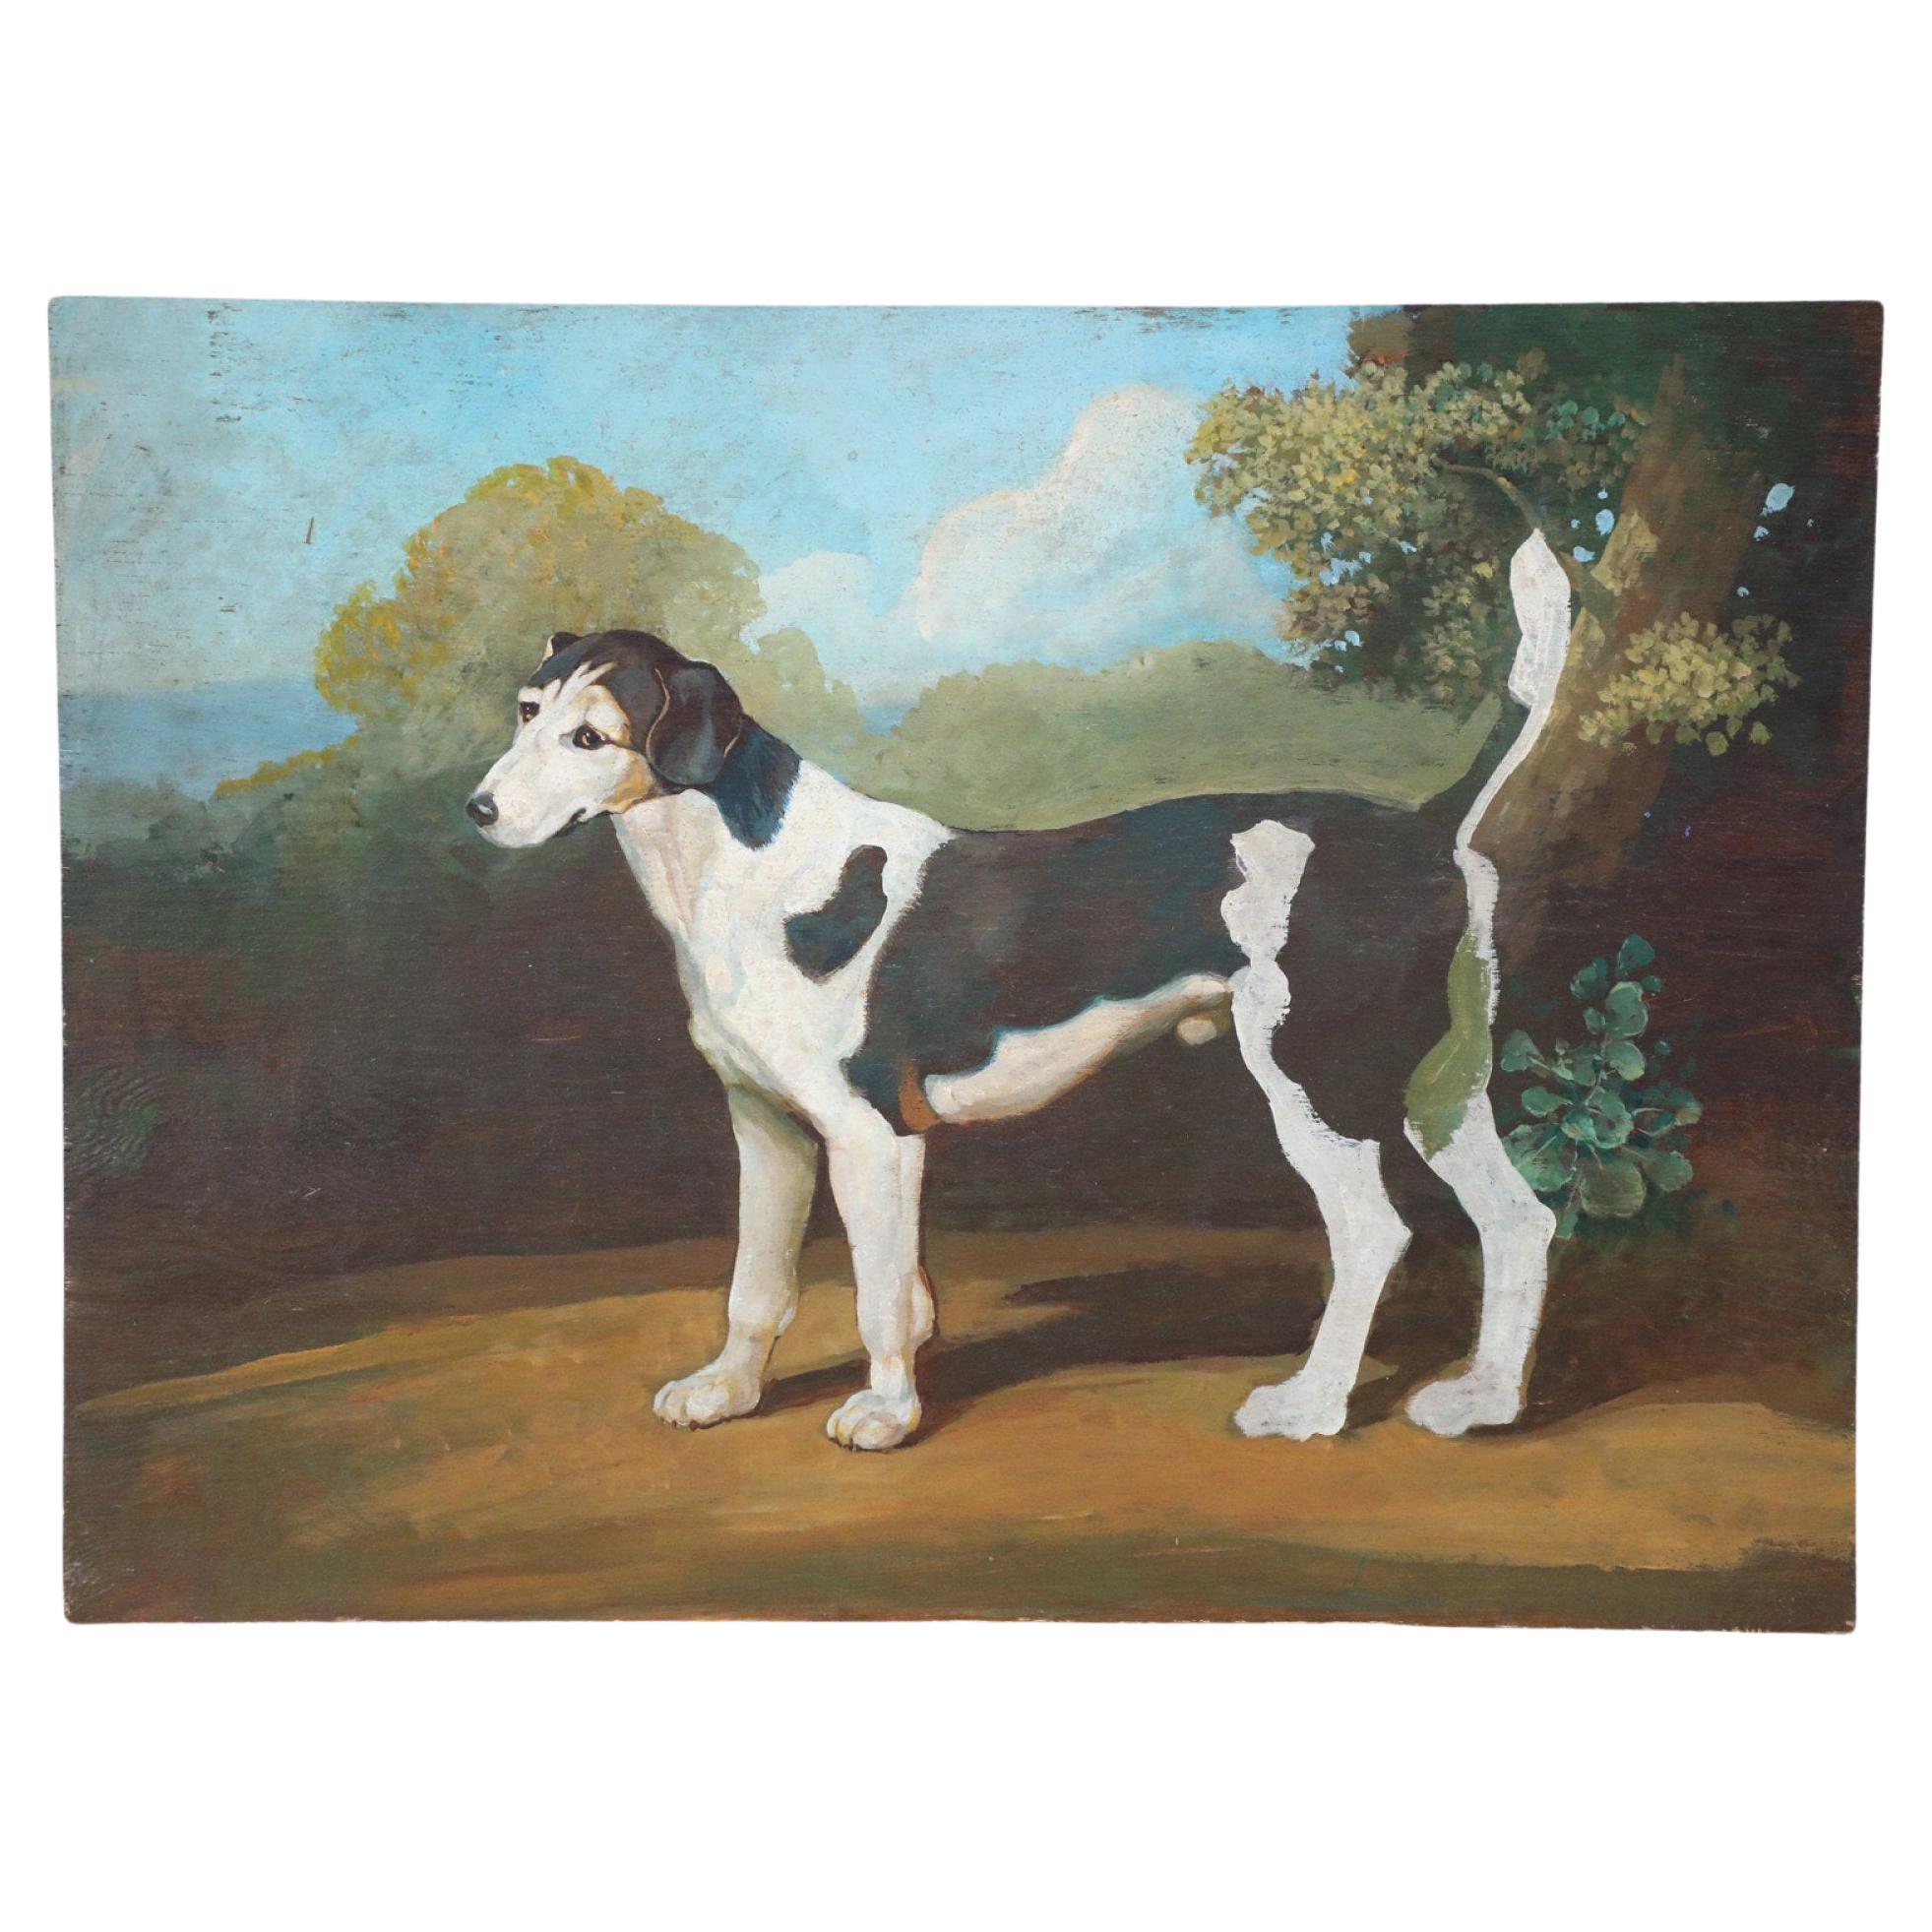 Black and White Dog Portrait Painting on Wood